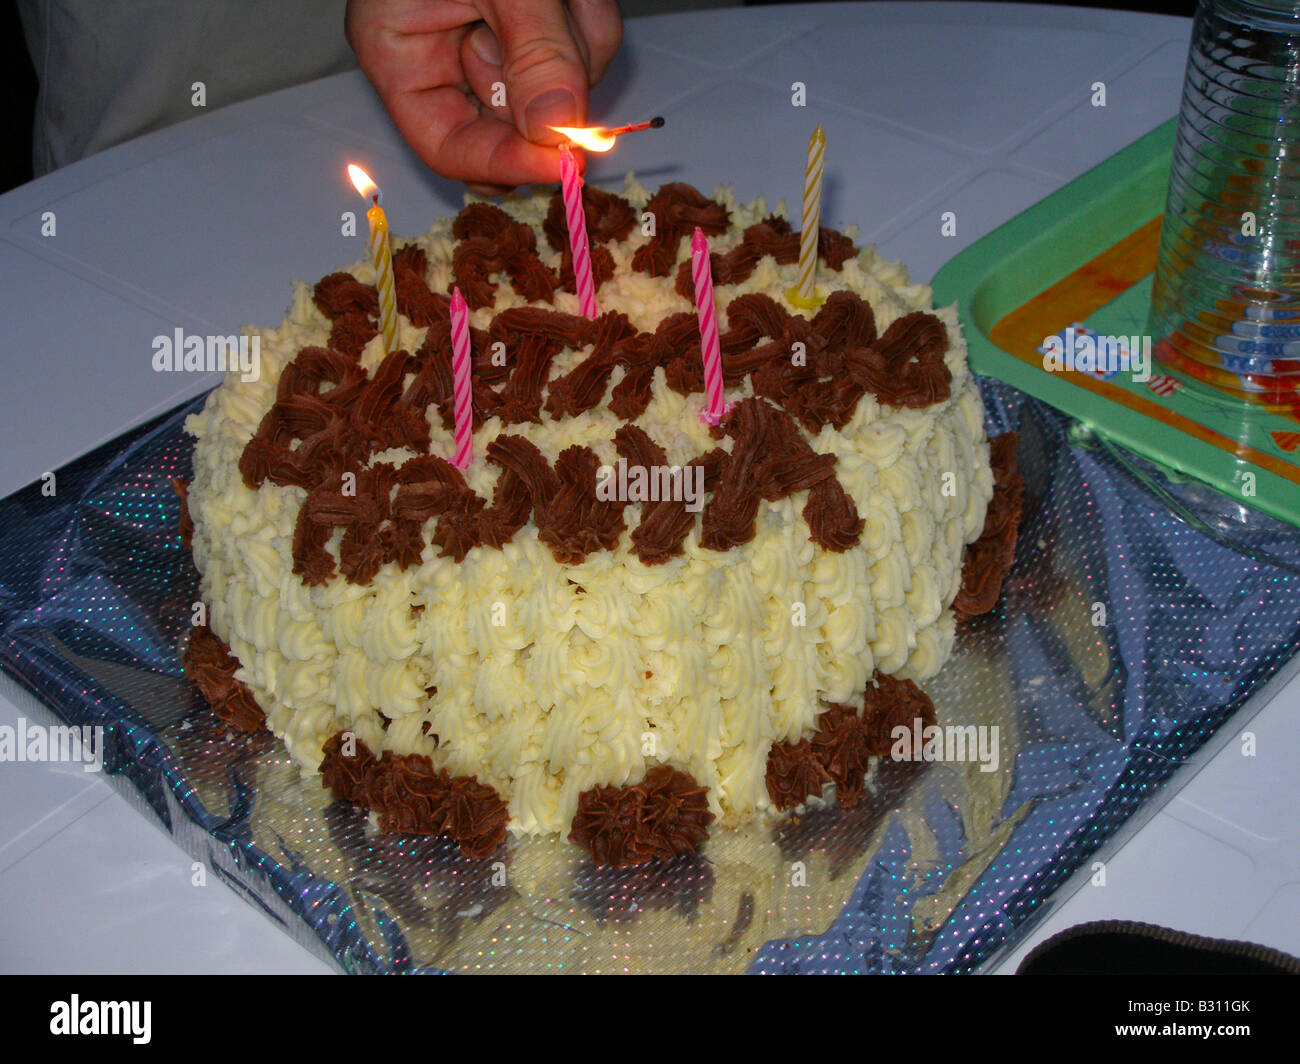 Lighting the candles on a birthday cake Stock Photo